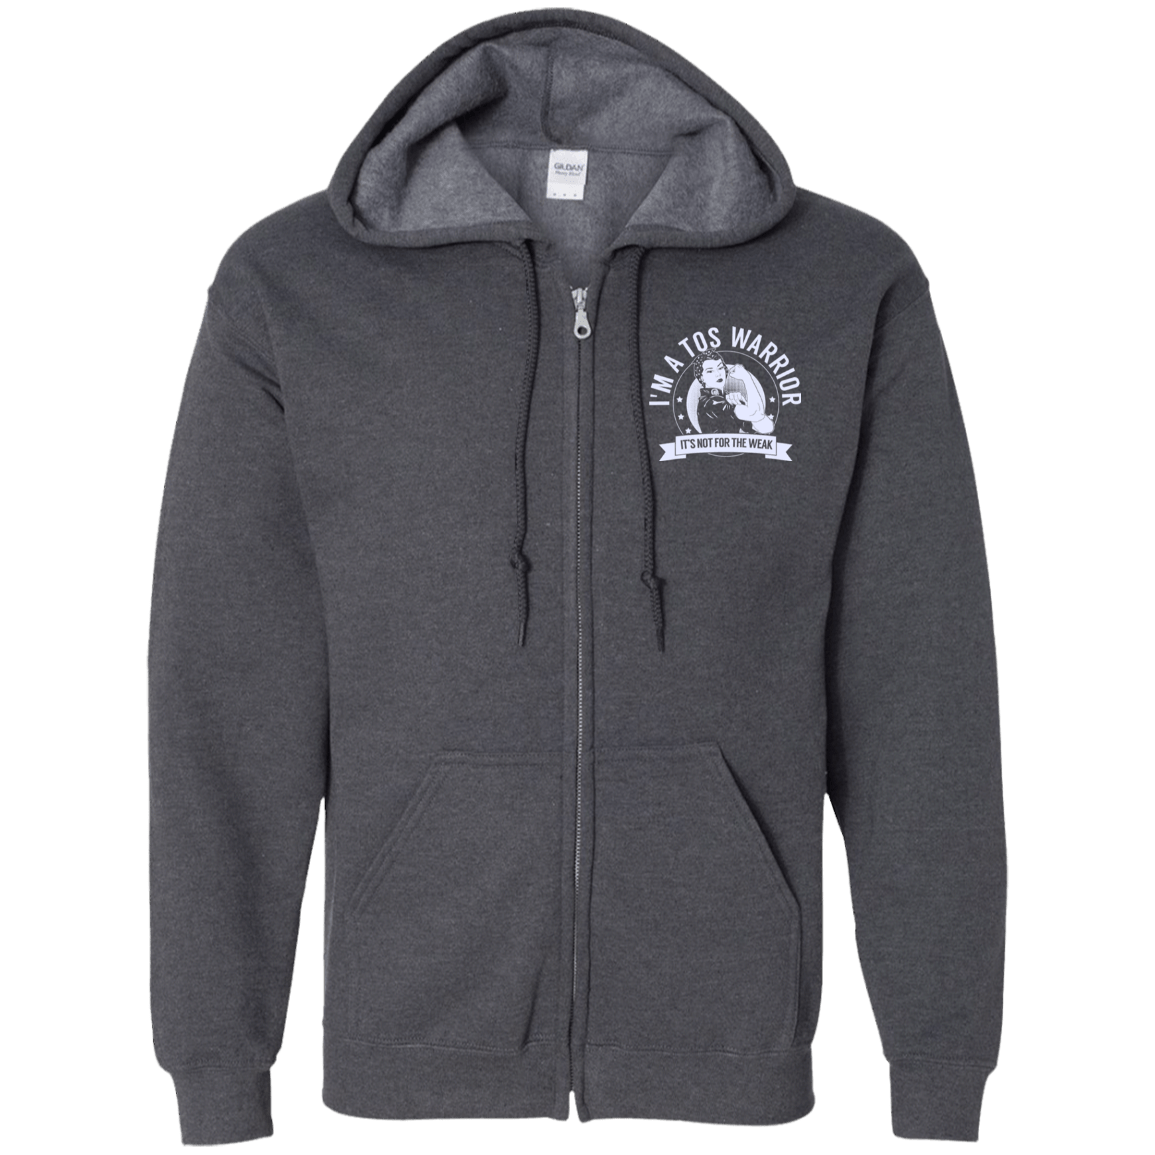 Thoracic Outlet Syndrome - TOS Warrior NFTW Zip Up Hooded Sweatshirt - The Unchargeables